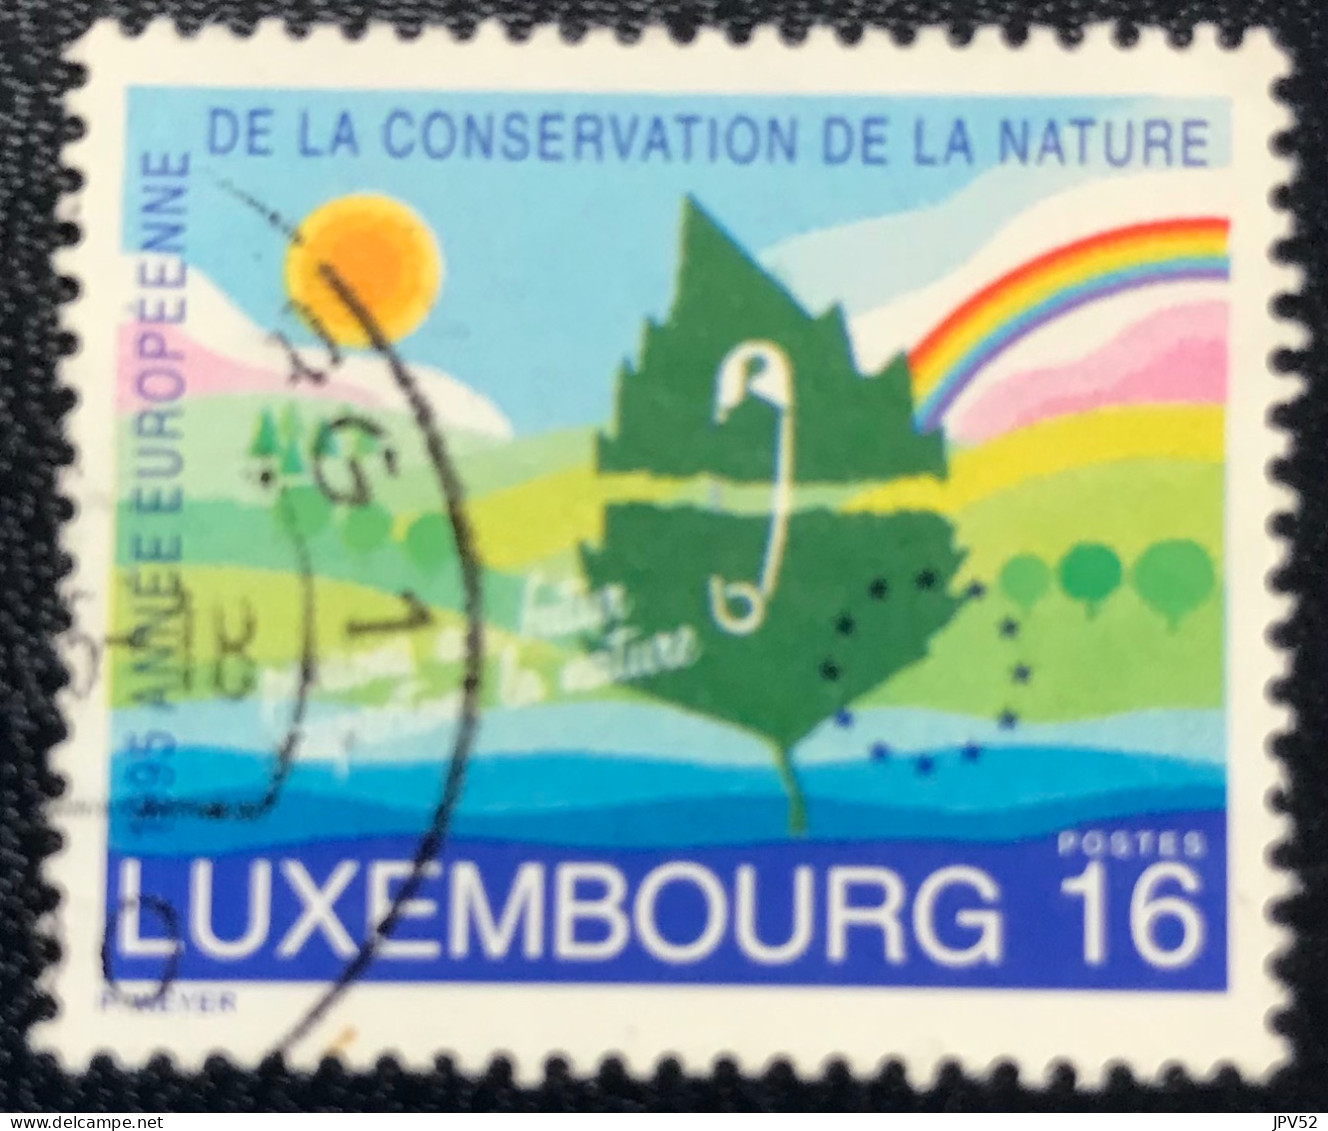 Luxembourg - Luxemburg - C18/30 - 1995 - (°)used - Michel 1373 - Natuurbescherming - Used Stamps